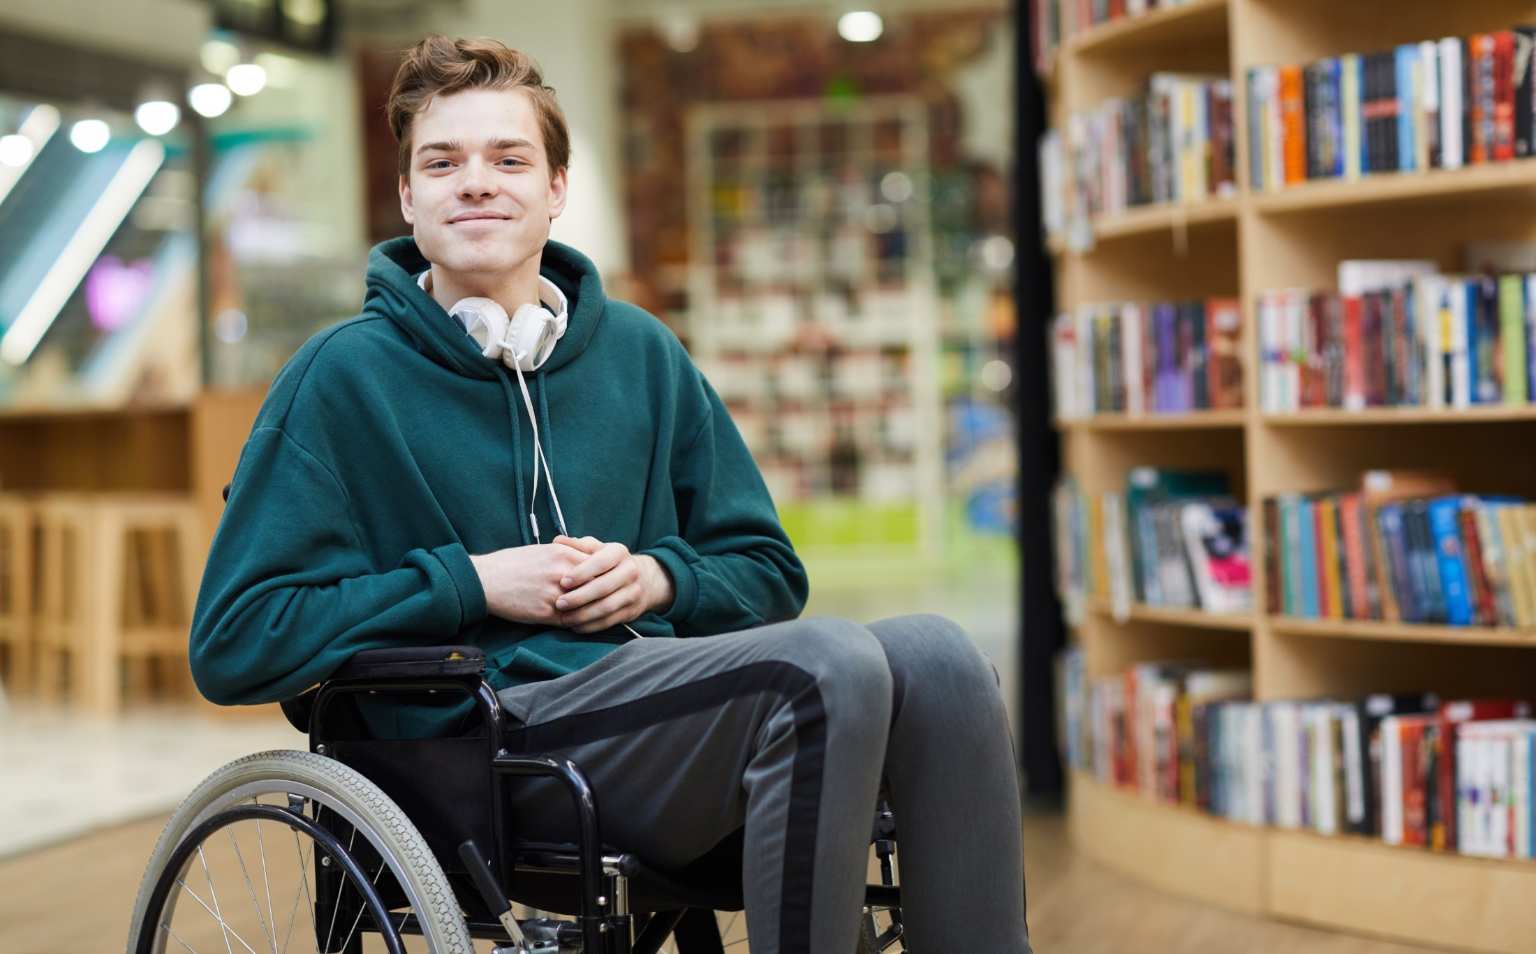 A Young man in a wheelchair is in a library, He is smiling with his arms across his lap.